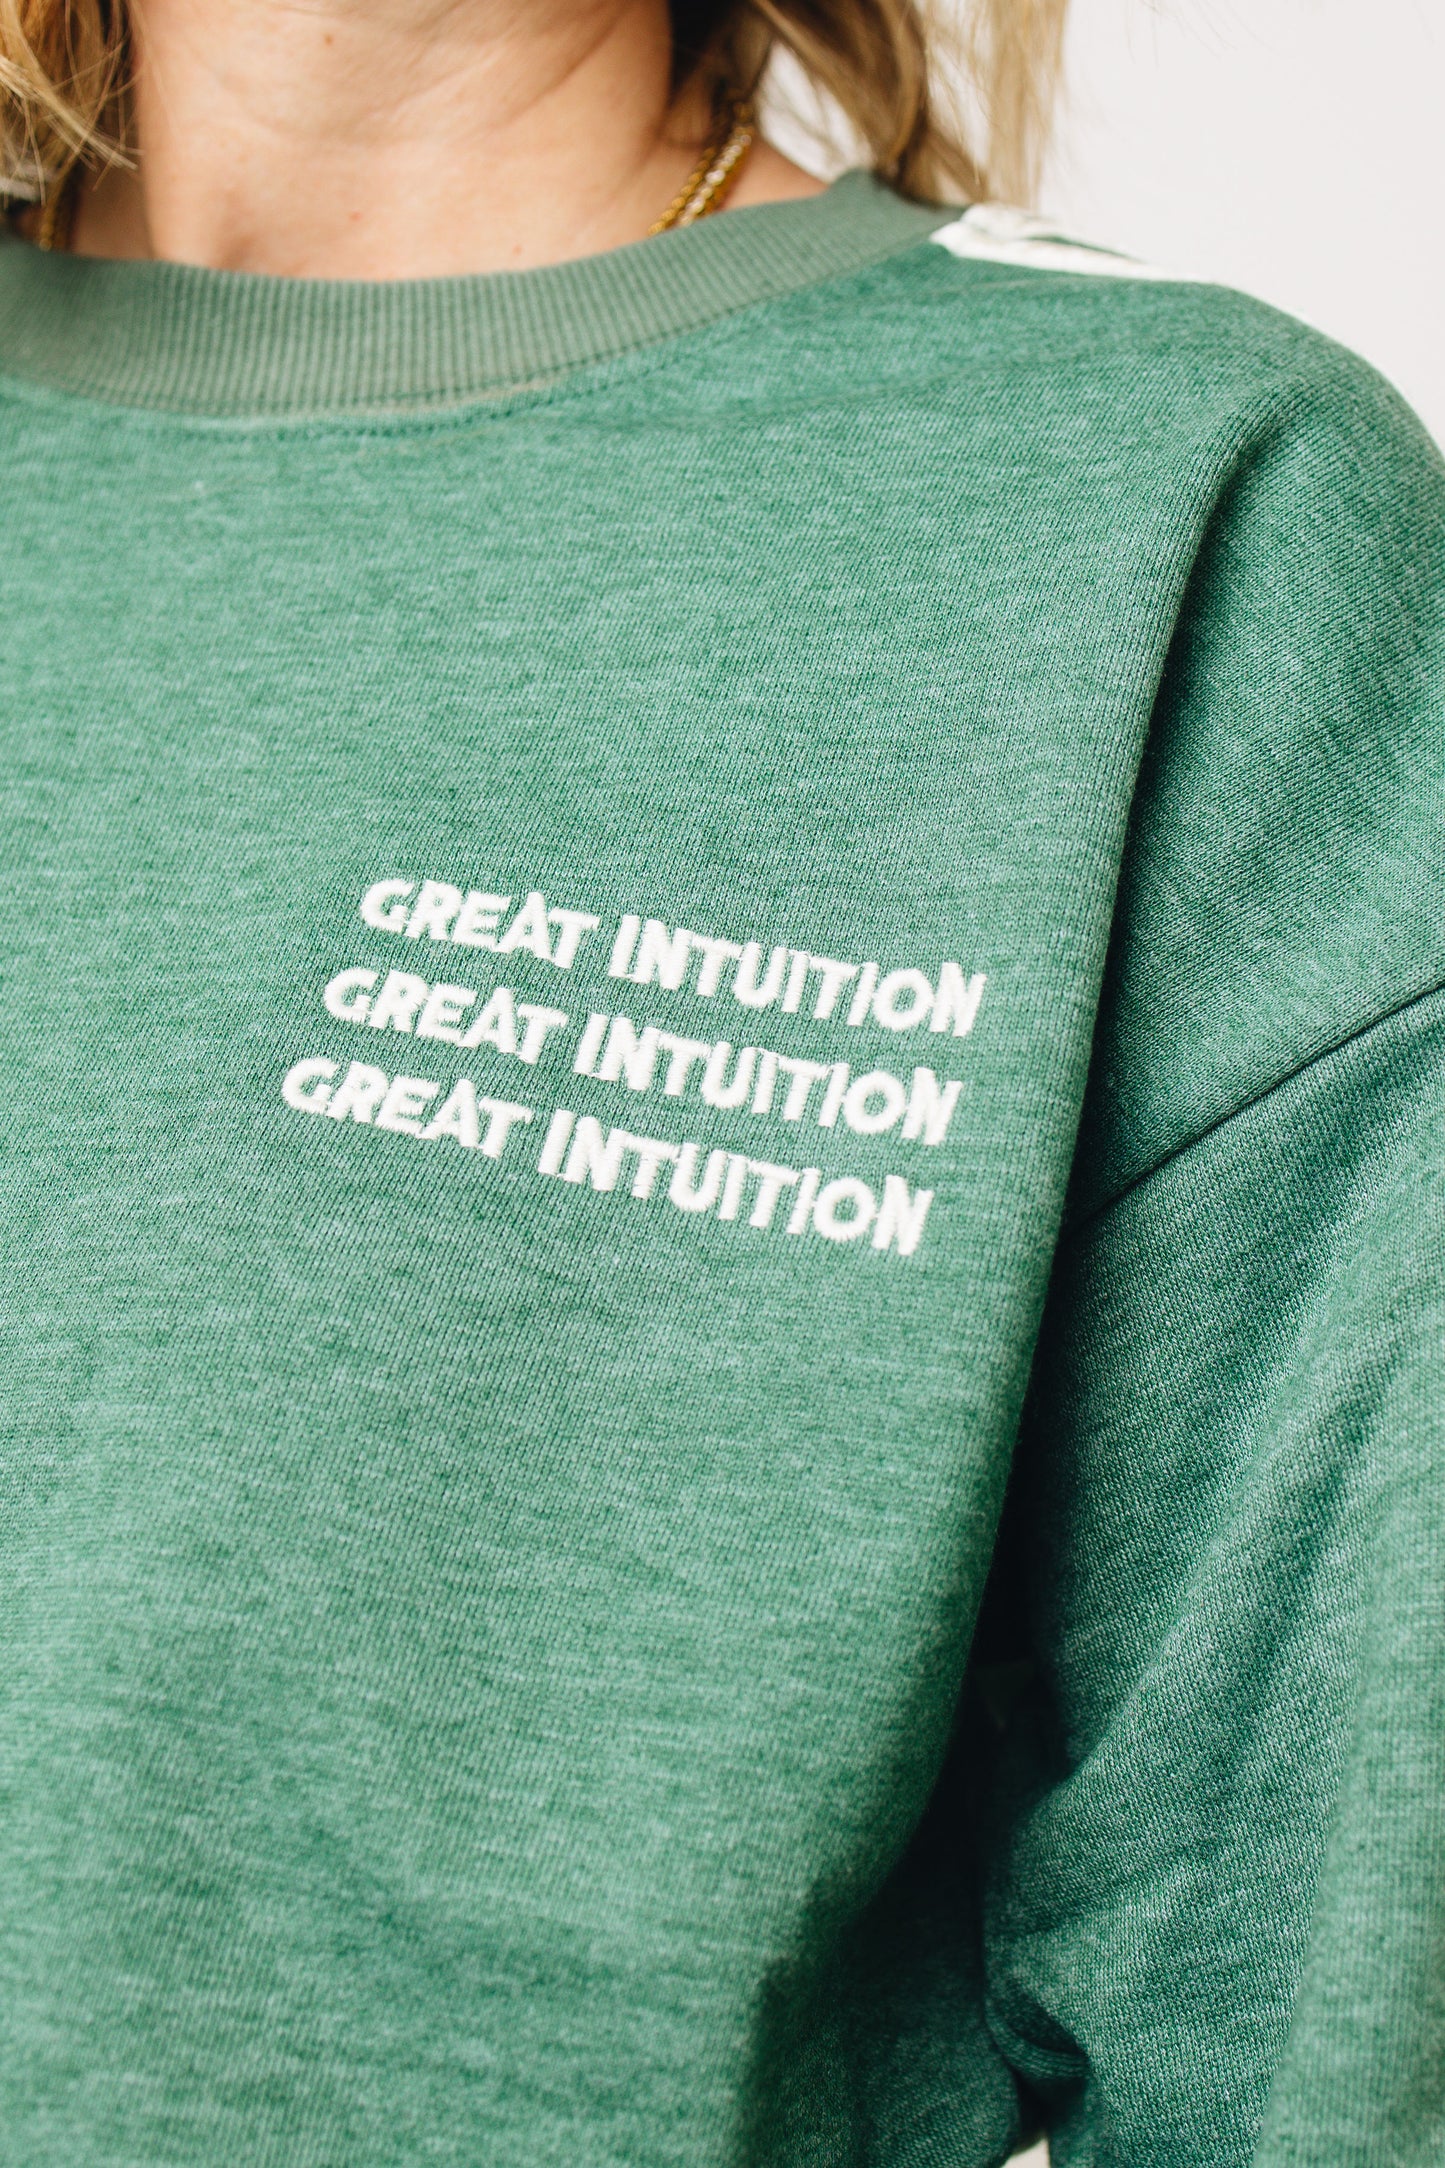 Great Intuition French Terry Sweater  (S-3XL)